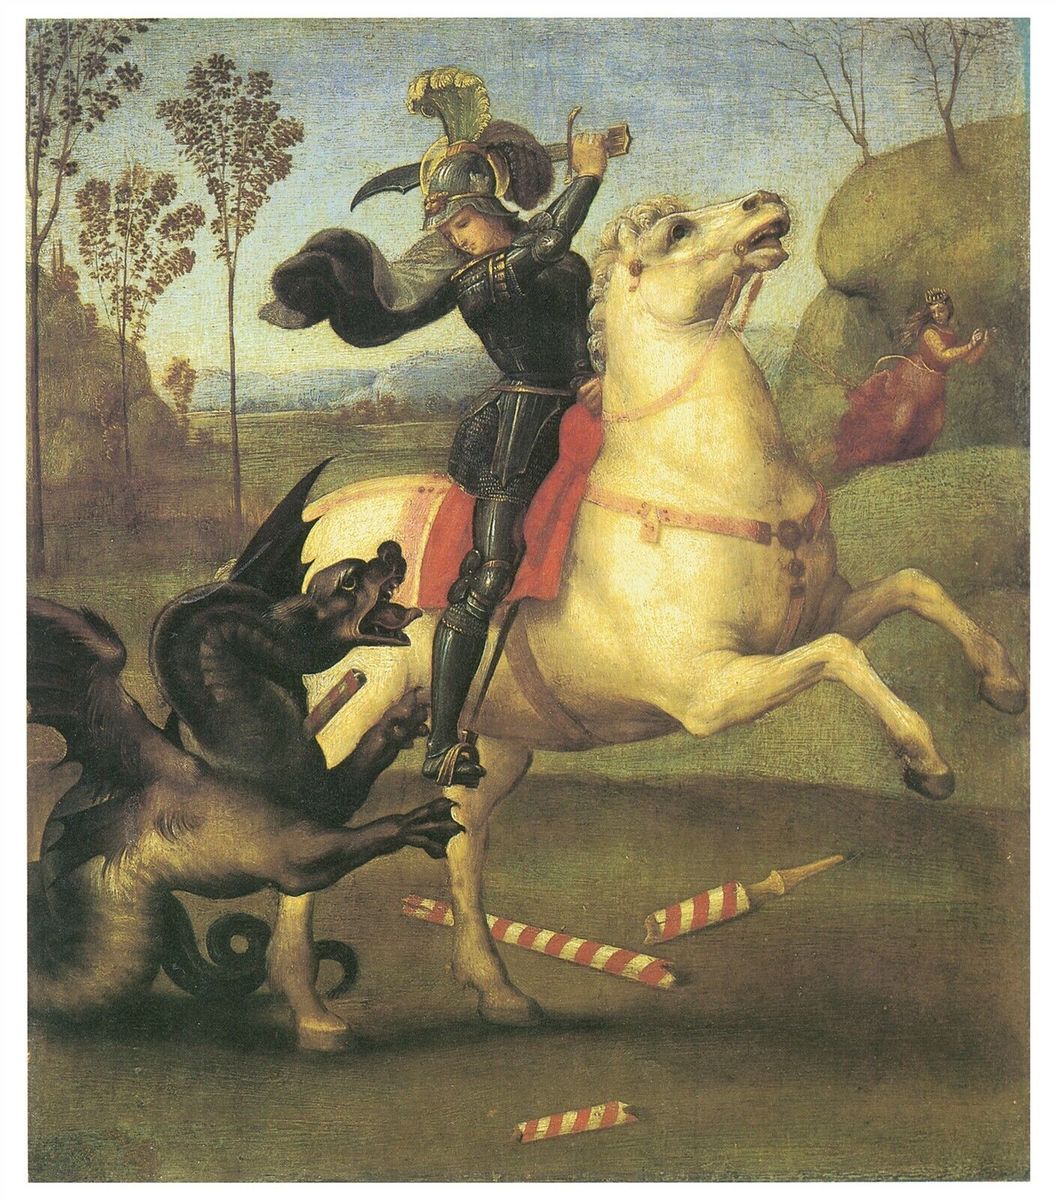 St. George and the Dragon 1505 Raphael Classical Great Art Painting Print 24x36 | eBay